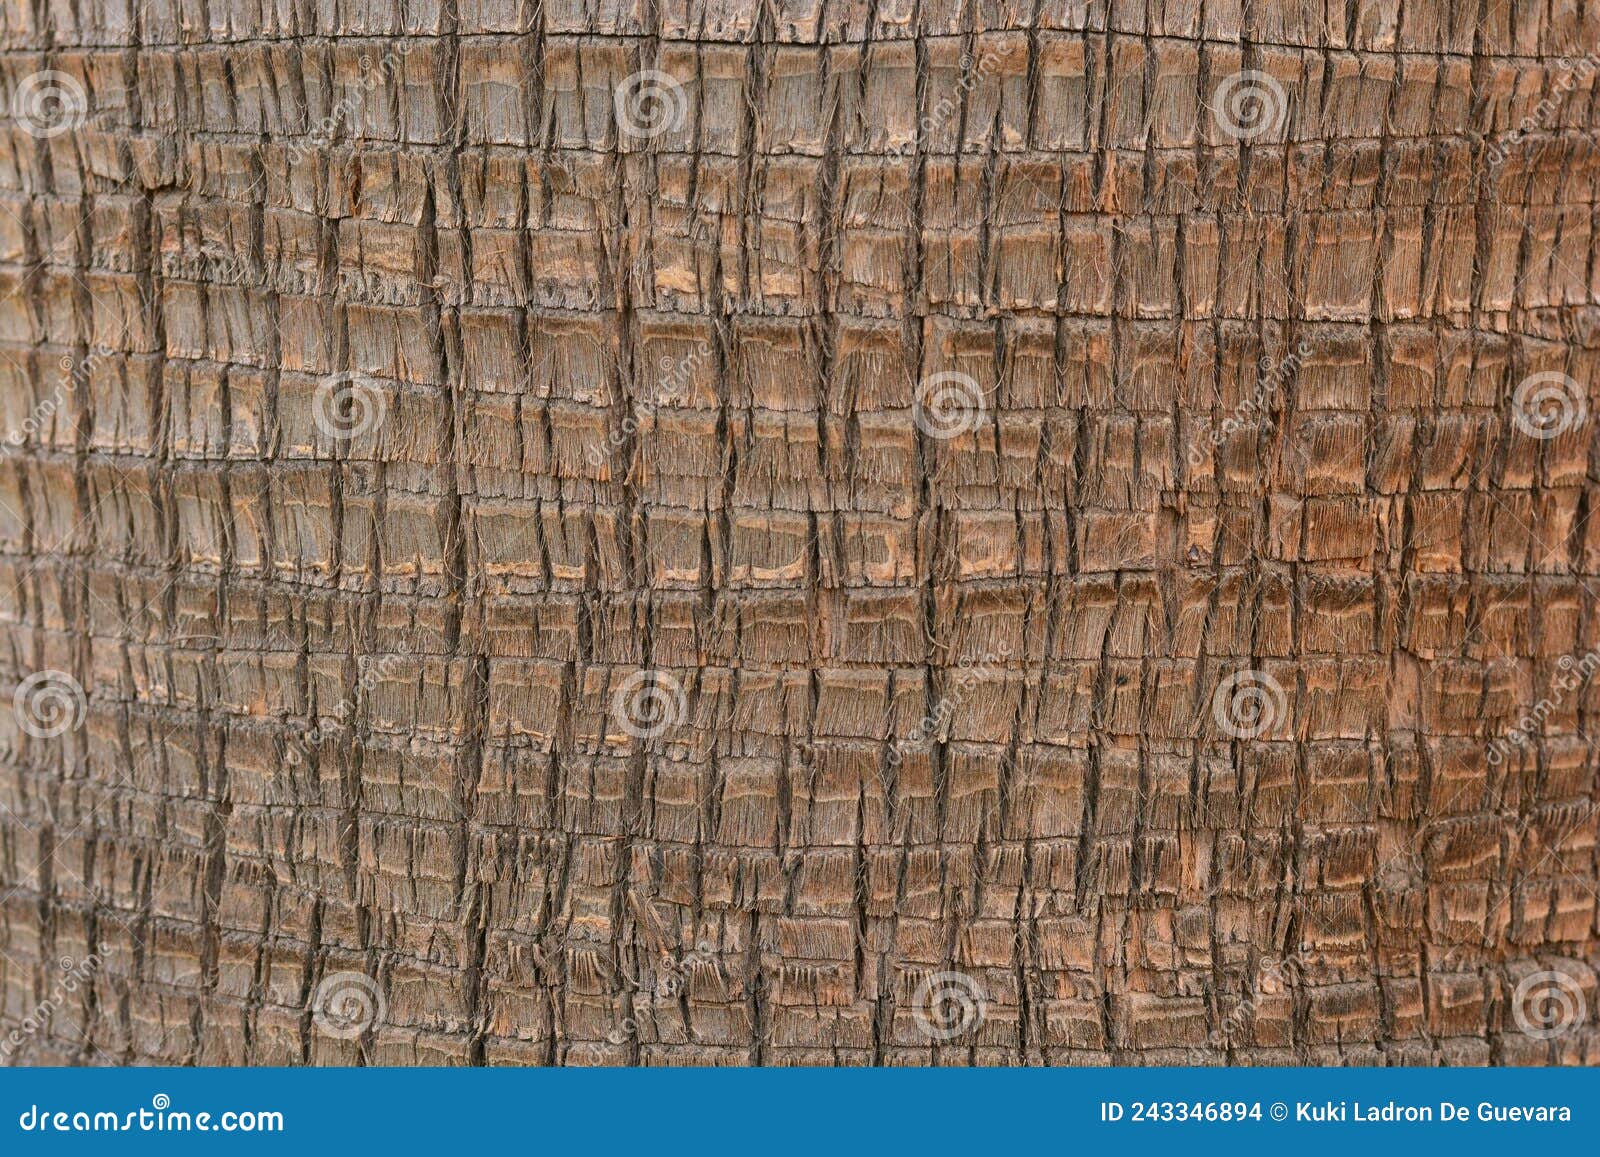 detail of the trunk of a washingtonia palm tree